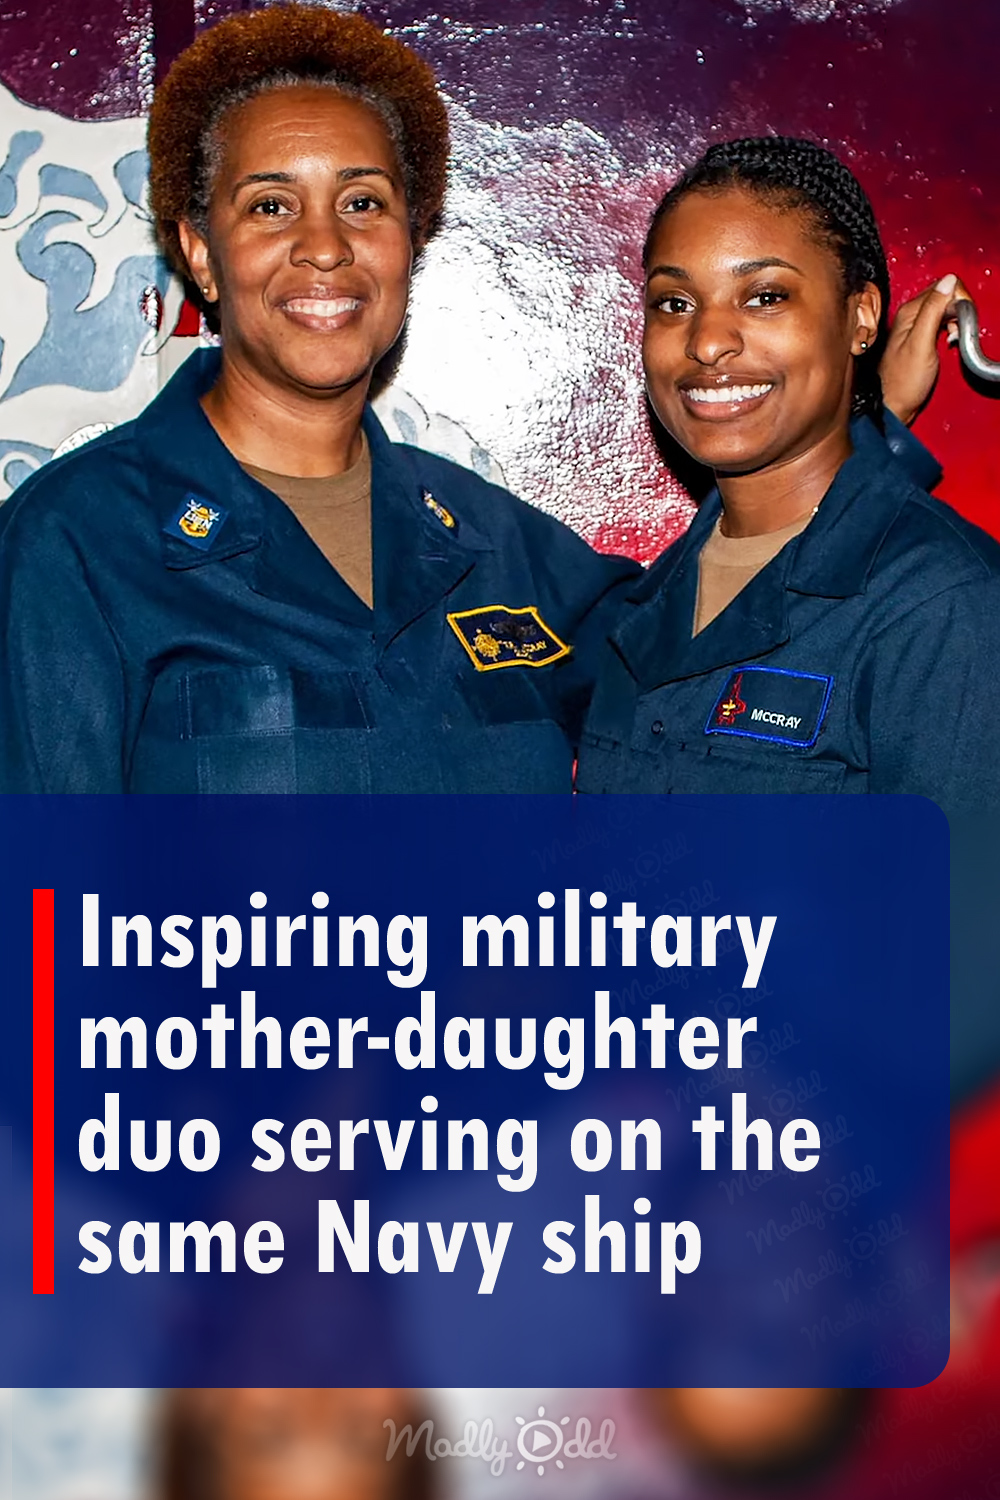 Inspiring military mother-daughter duo serving on the same Navy ship